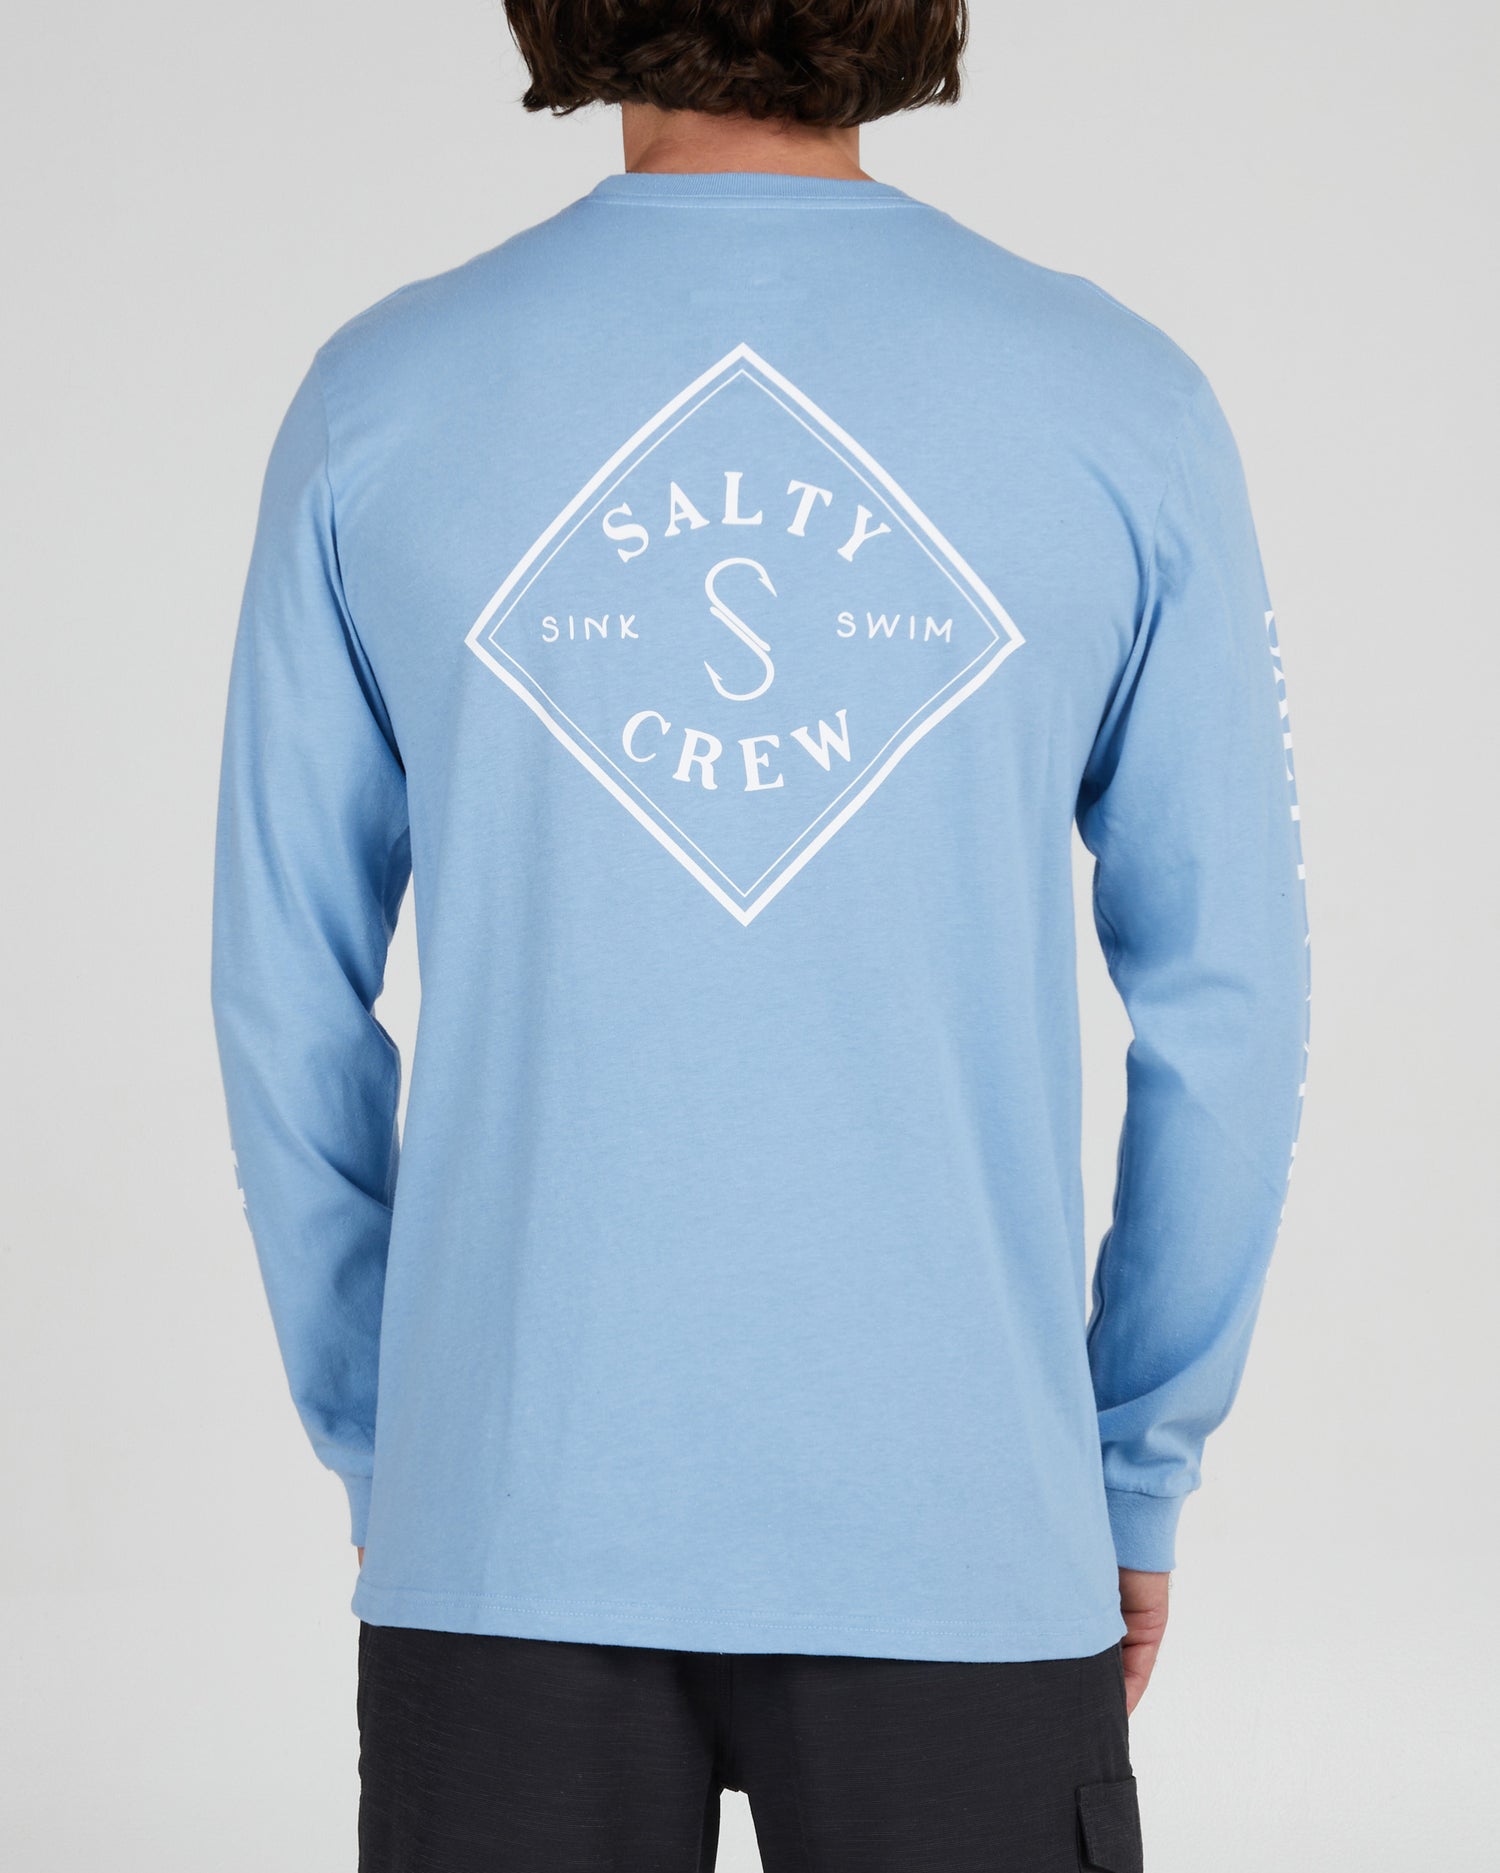 On body back of the Tippet Marine Blue L/S Premium Tee